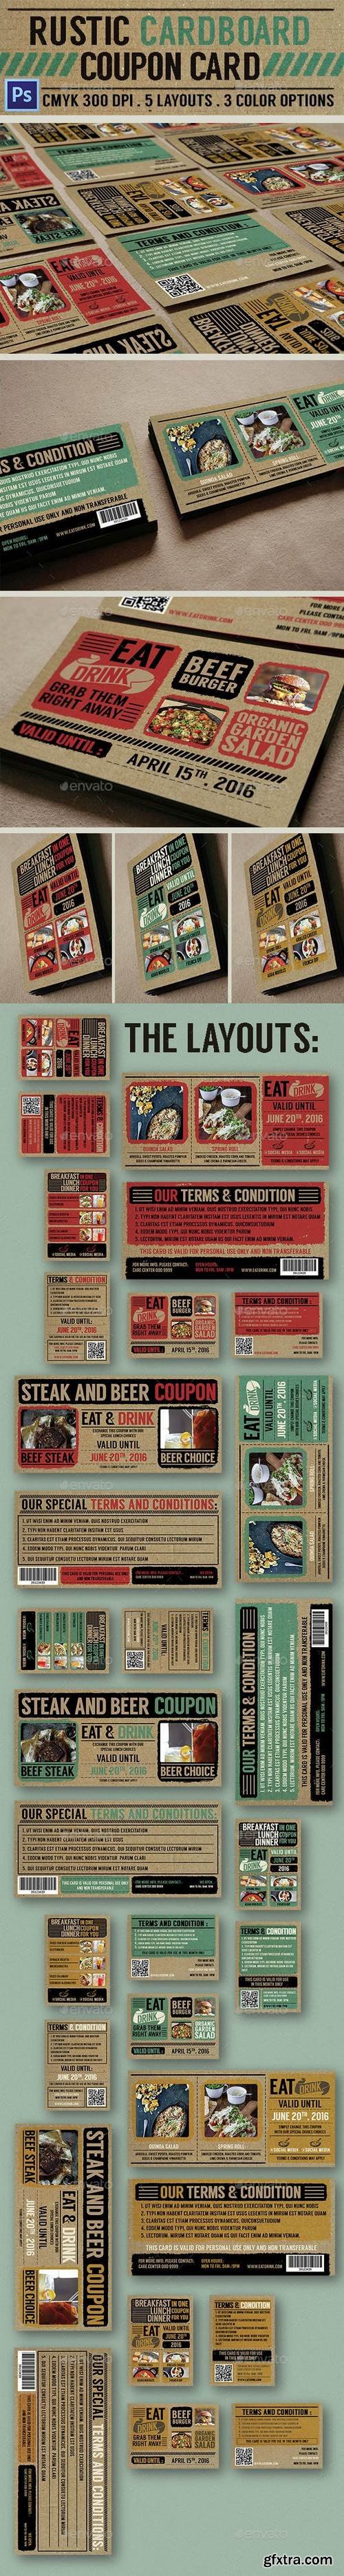 Graphicriver - Rustic Cardboard Coupon Card 15224881